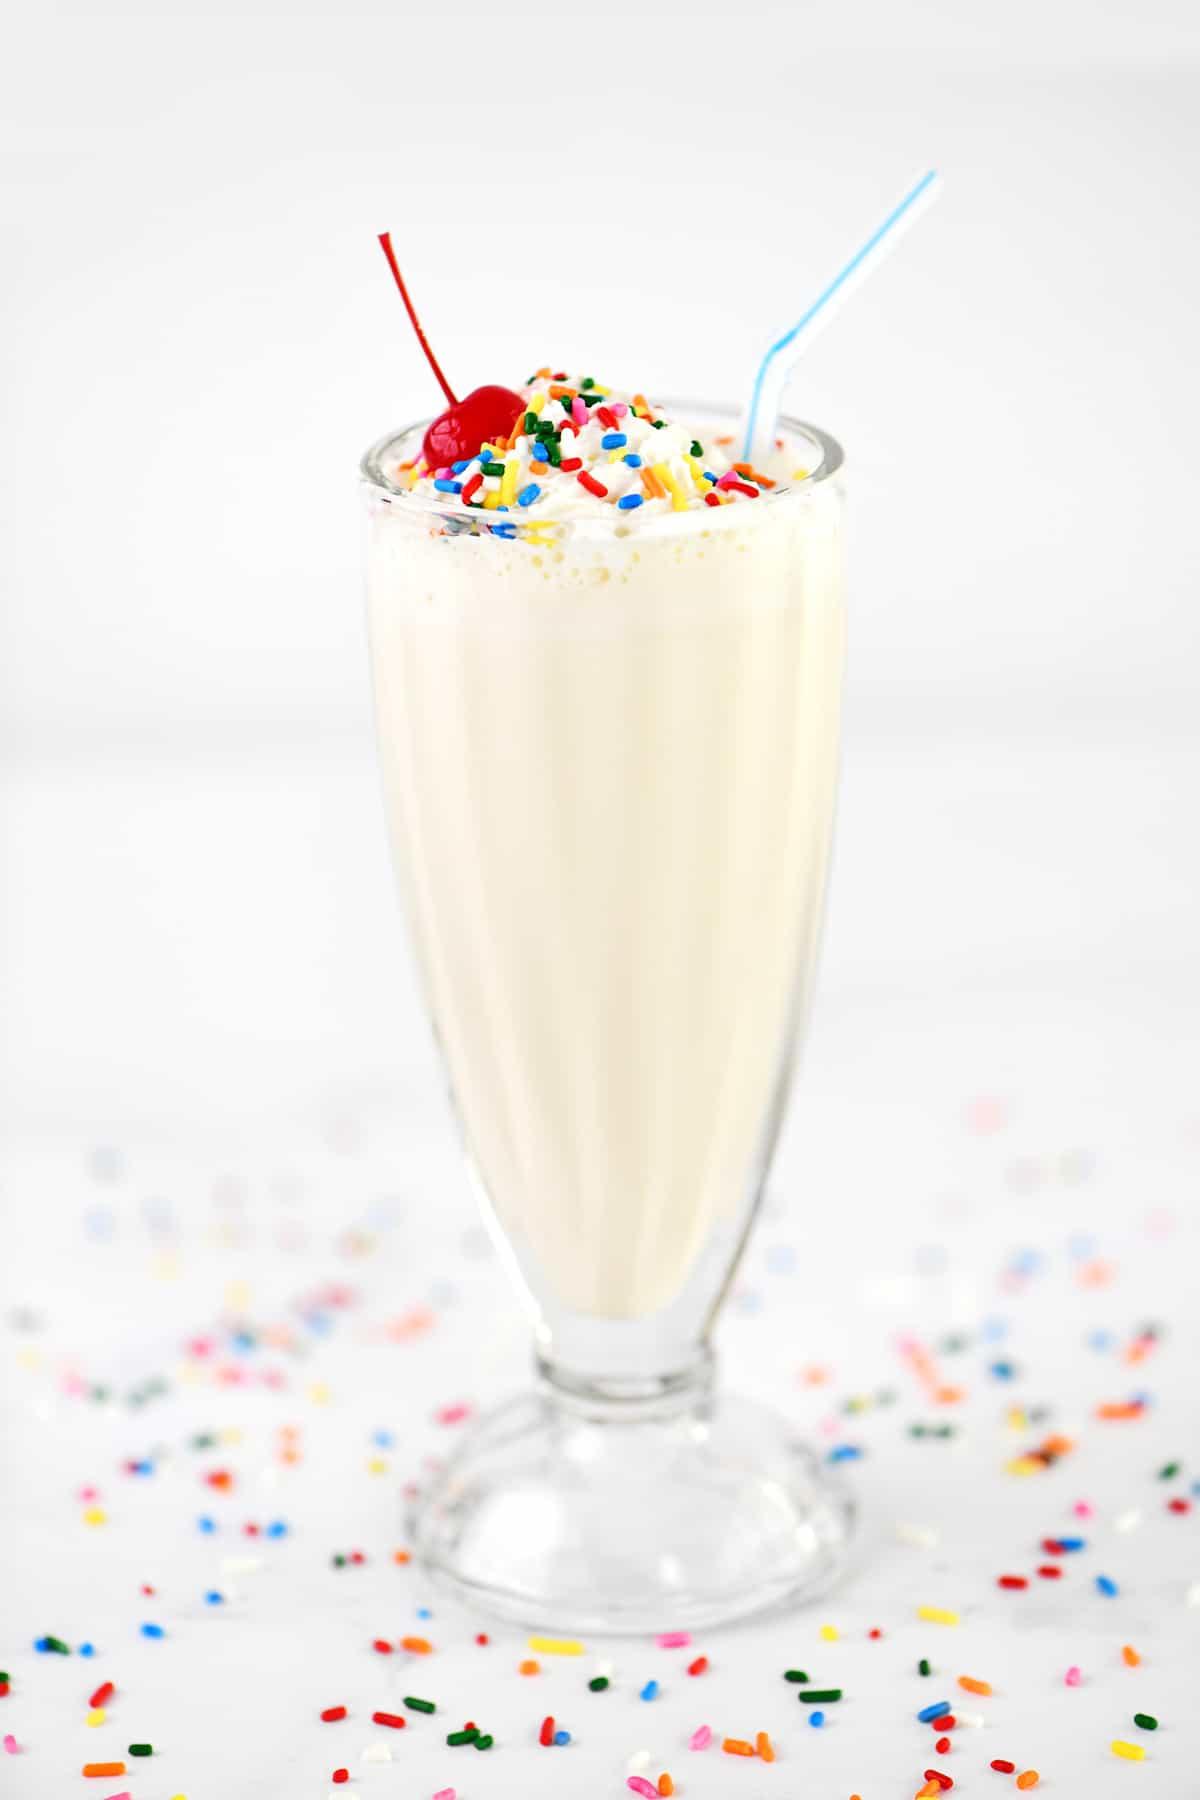 A vanilla milkshake rests on a countertop with candy sprinkles all around it.